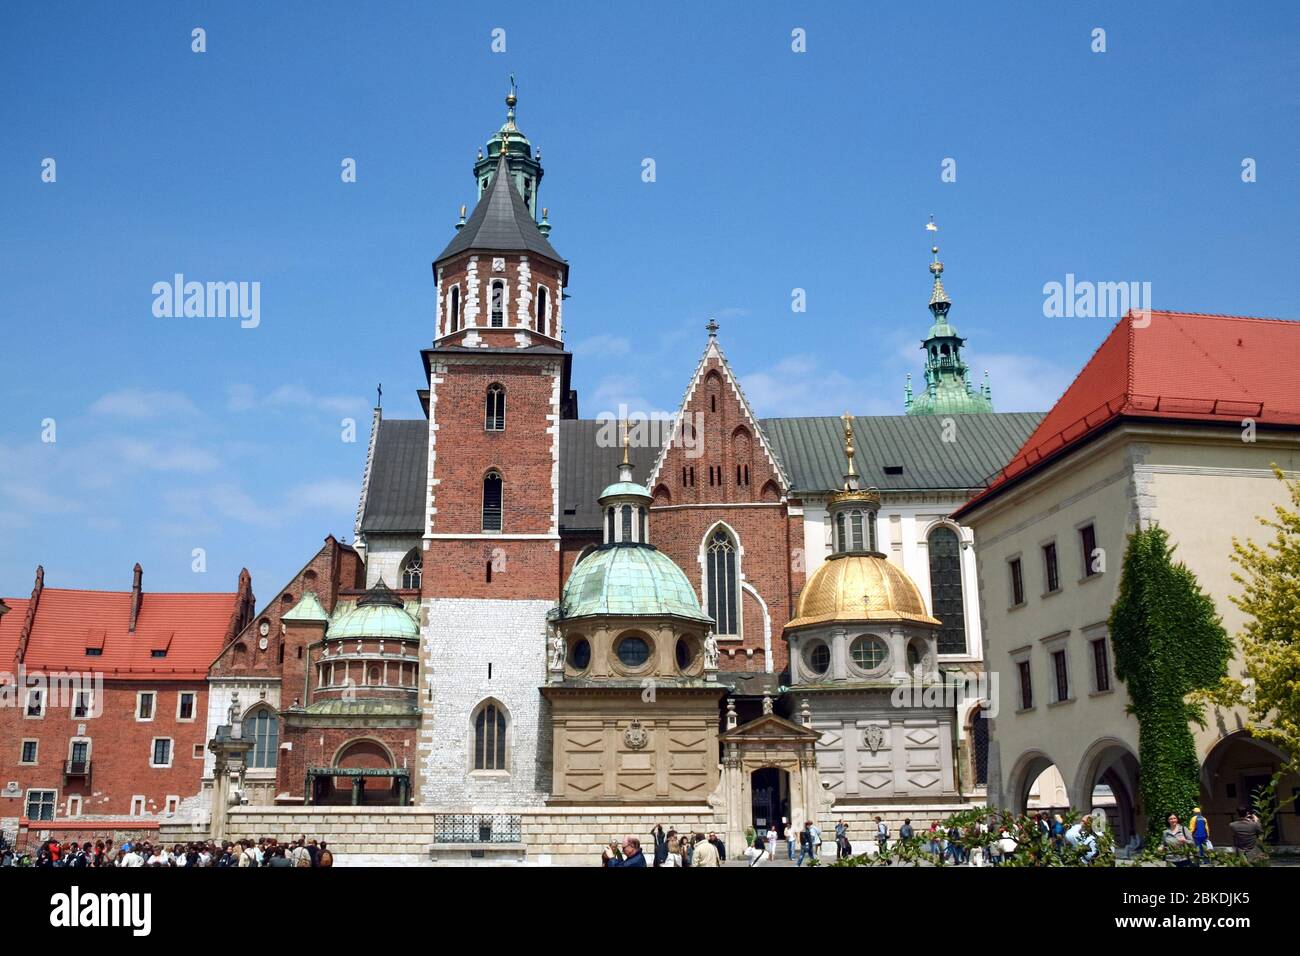 KRAKOW, POLAND - JUNE 6, 2009: Saints peter and paul church in Krakow with tourists entering. Also called kosciol swietych apostolow piotra i pawla, i Stock Photo